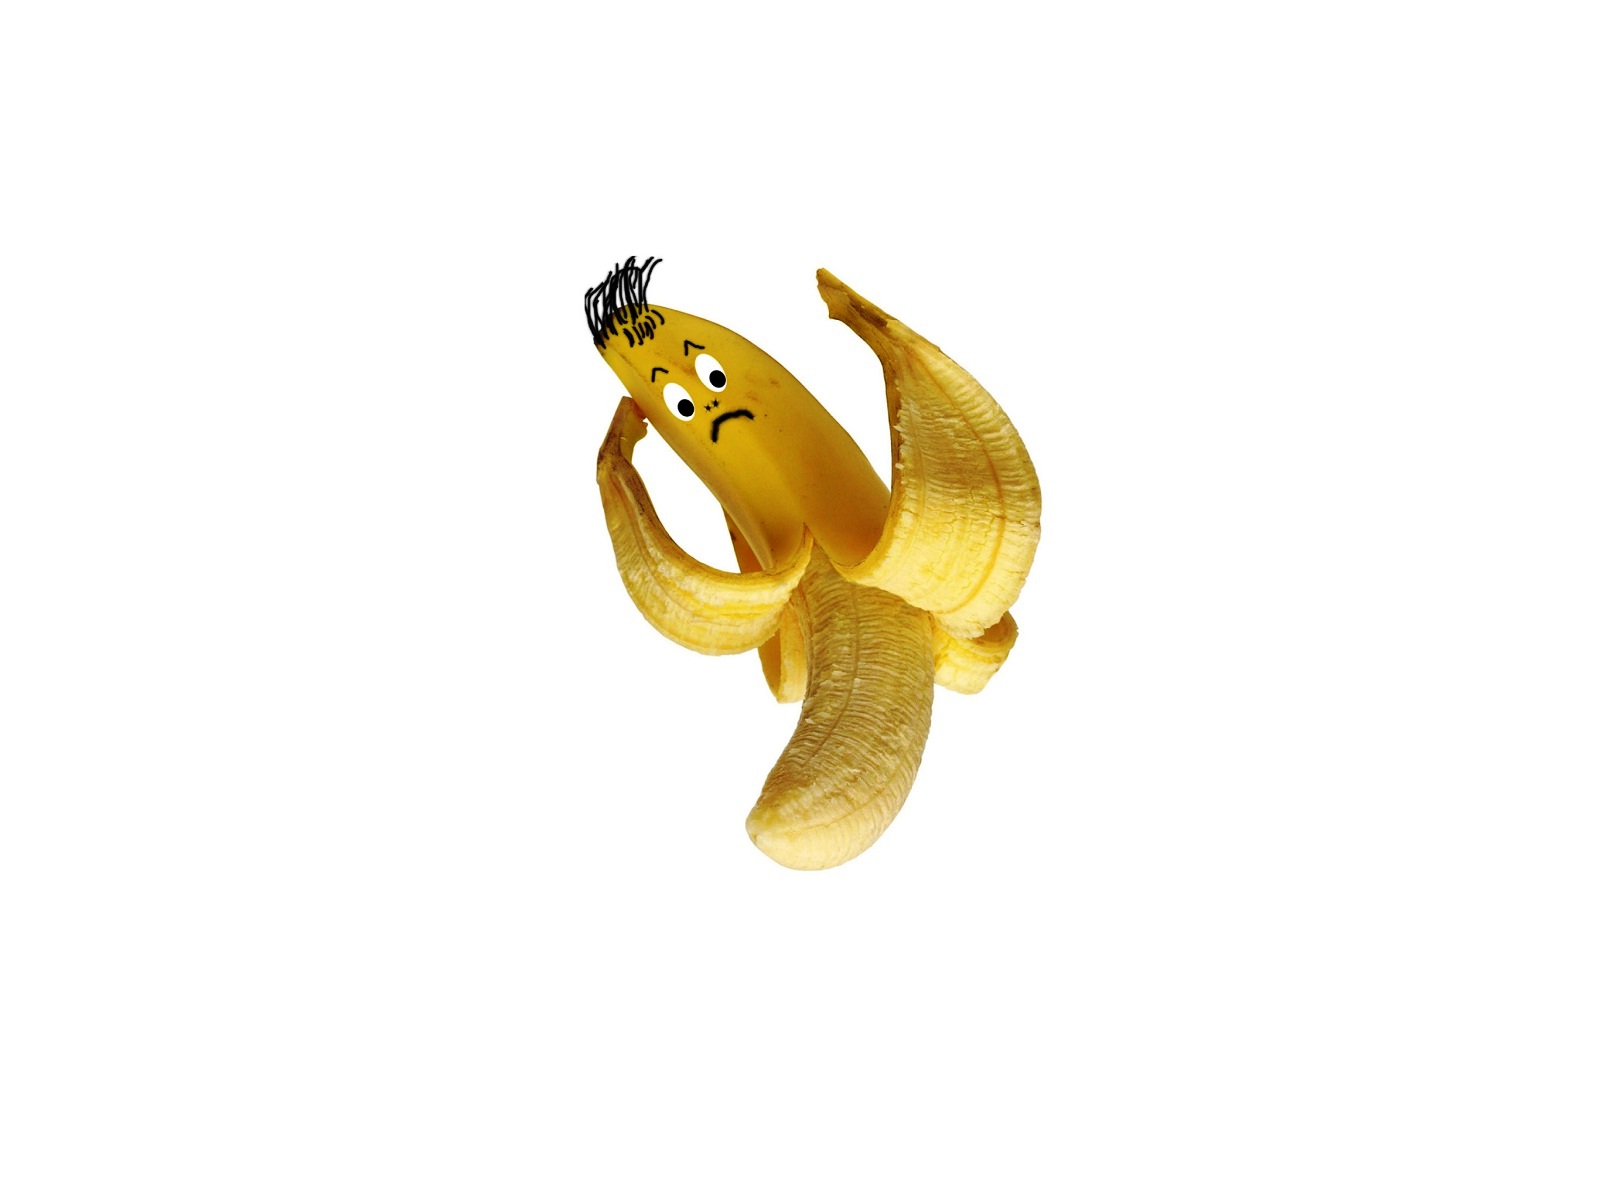 Very funny banana fruits new wallpapers   New hd